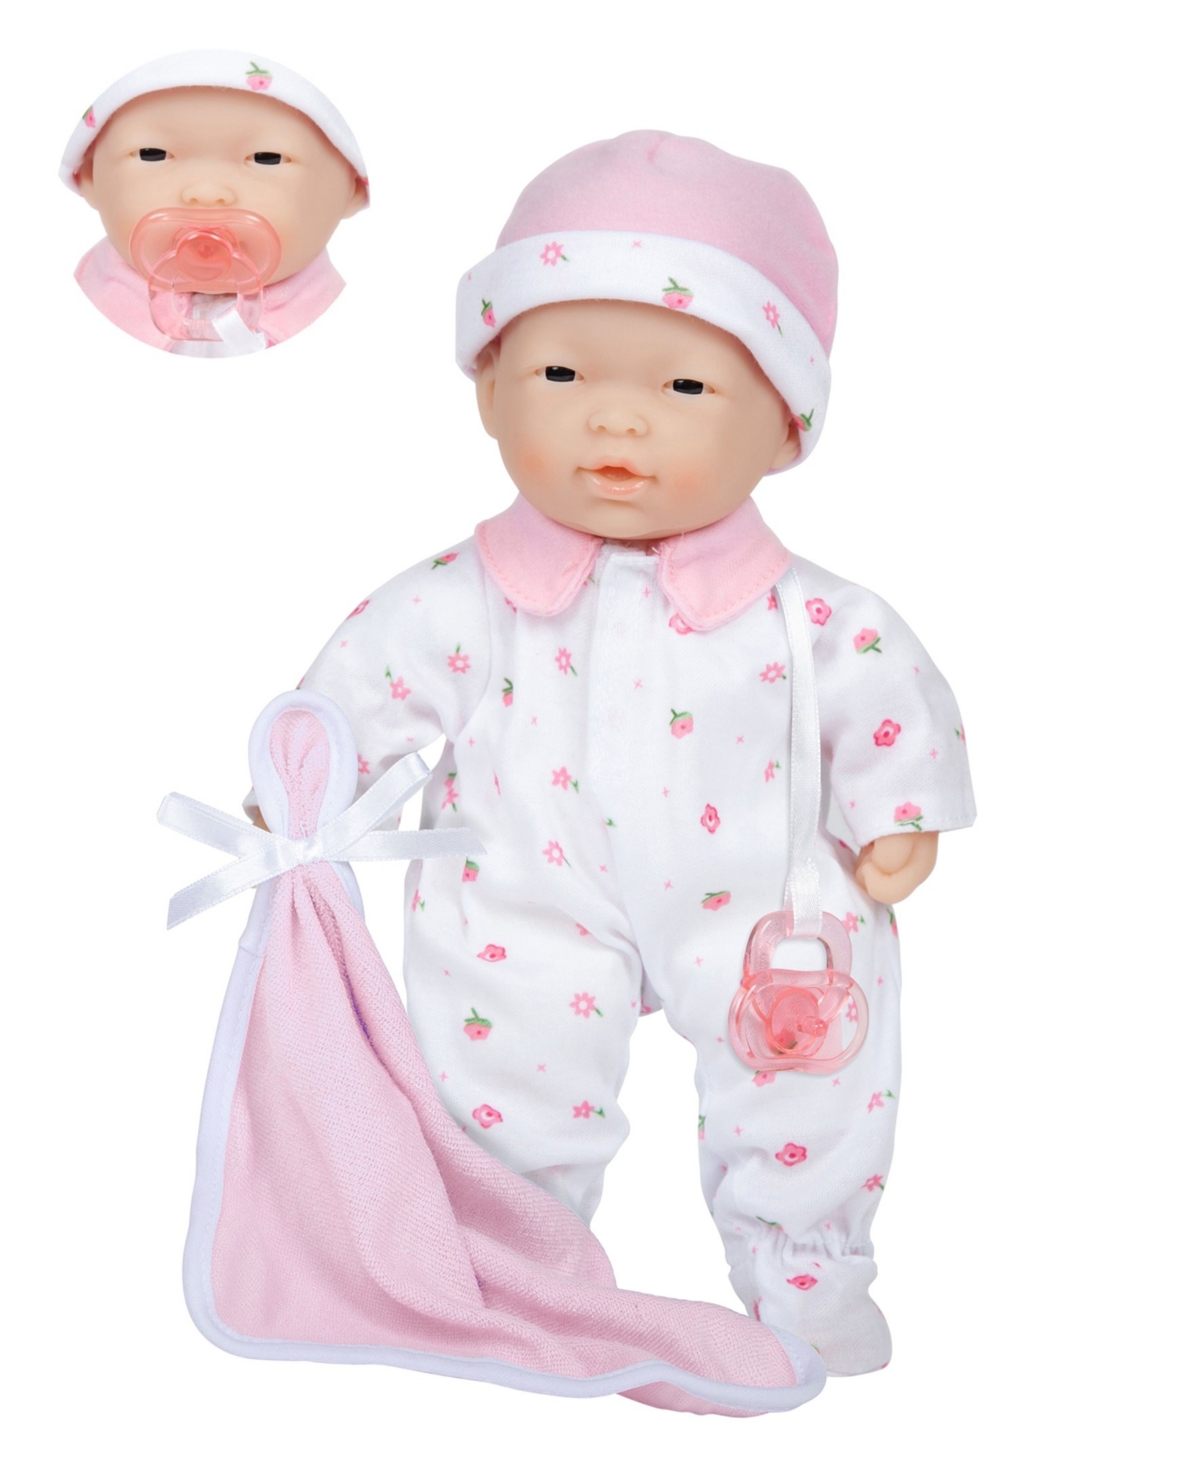 Jc Toys Kids' La Baby Asian 11" Soft Body Baby Doll Pink Outfit In Asian - Pink